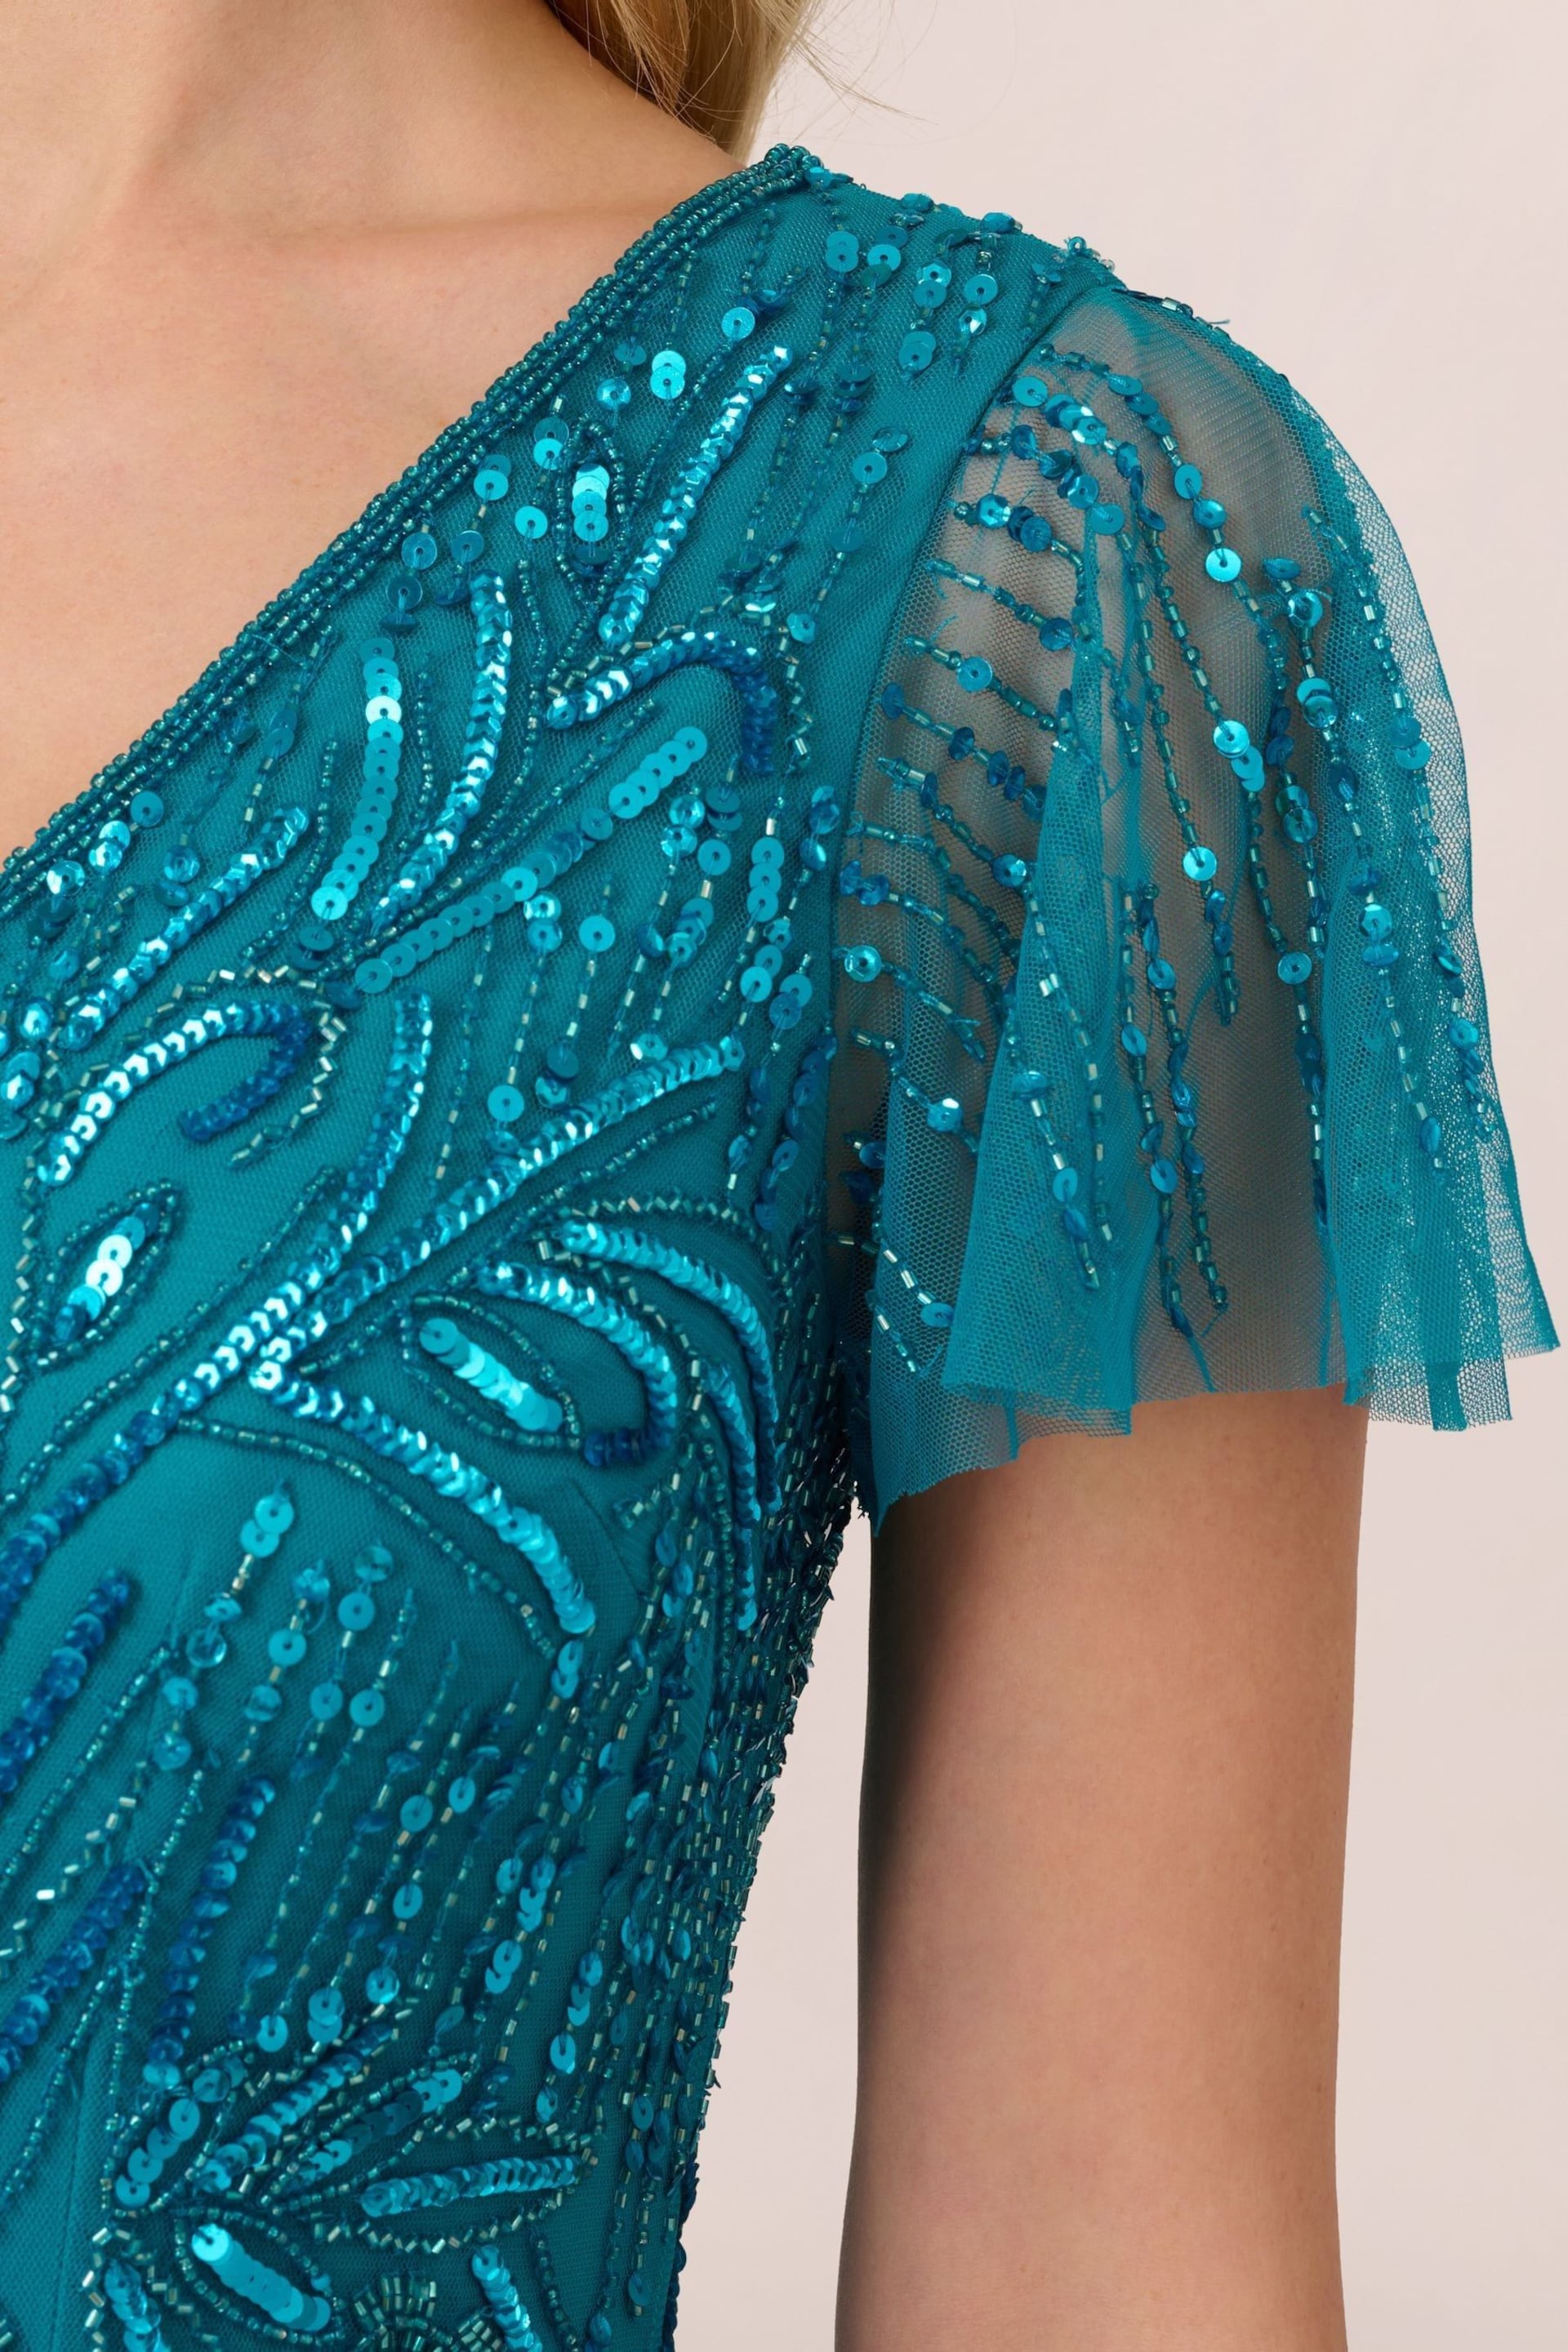 Adrianna Papell Blue Flutter Sleeve Beaded Gown - Image 5 of 7